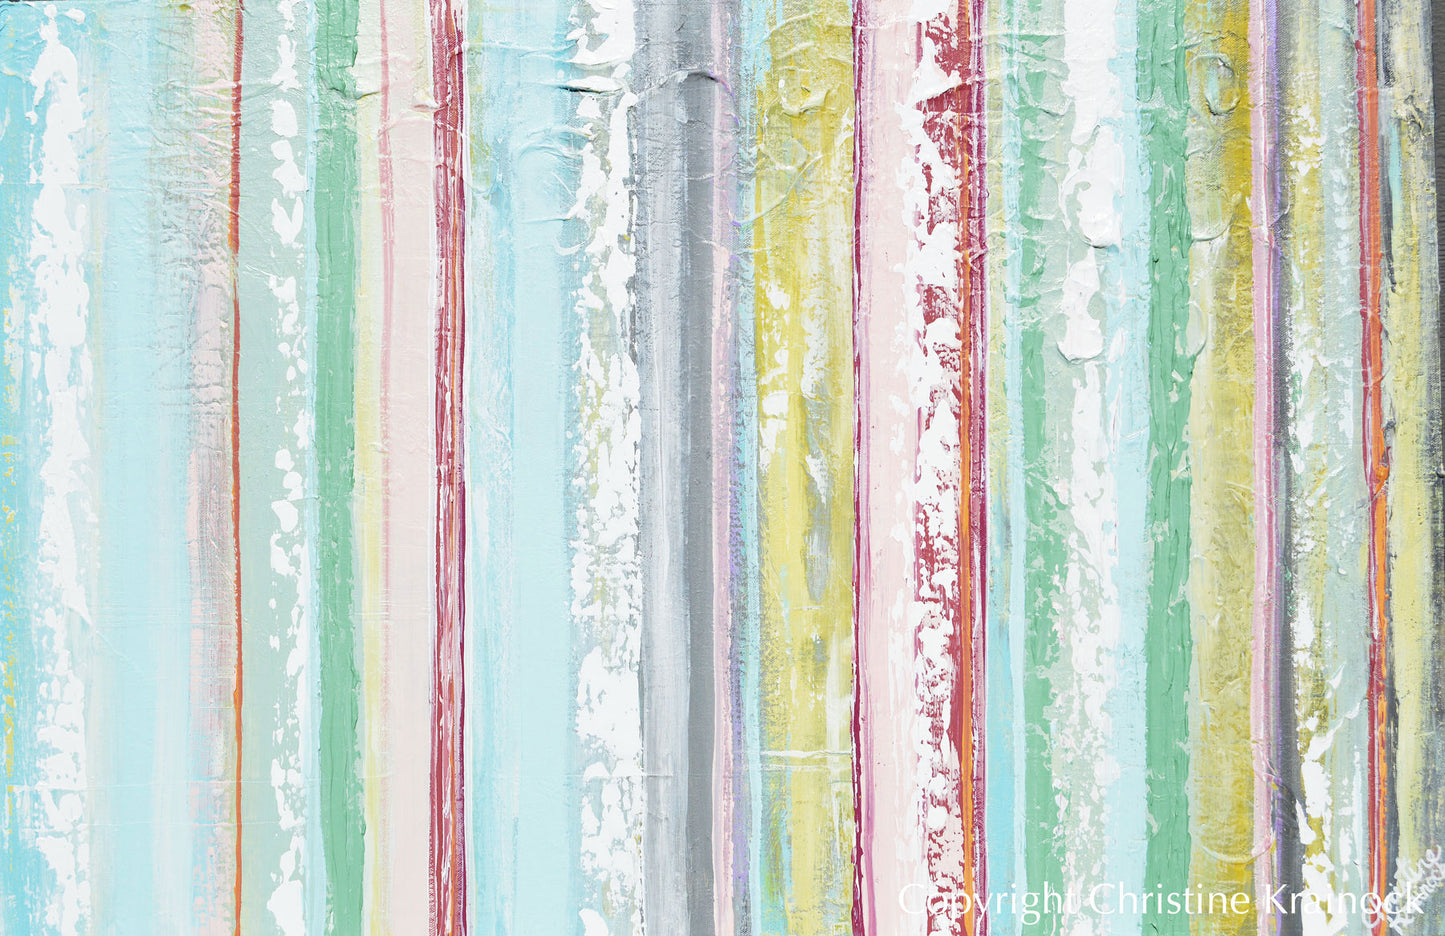 ORIGINAL Art Abstract Painting Yellow Turquoise Blue Pink Stripes Textured Modern Wall Decor 36x24"